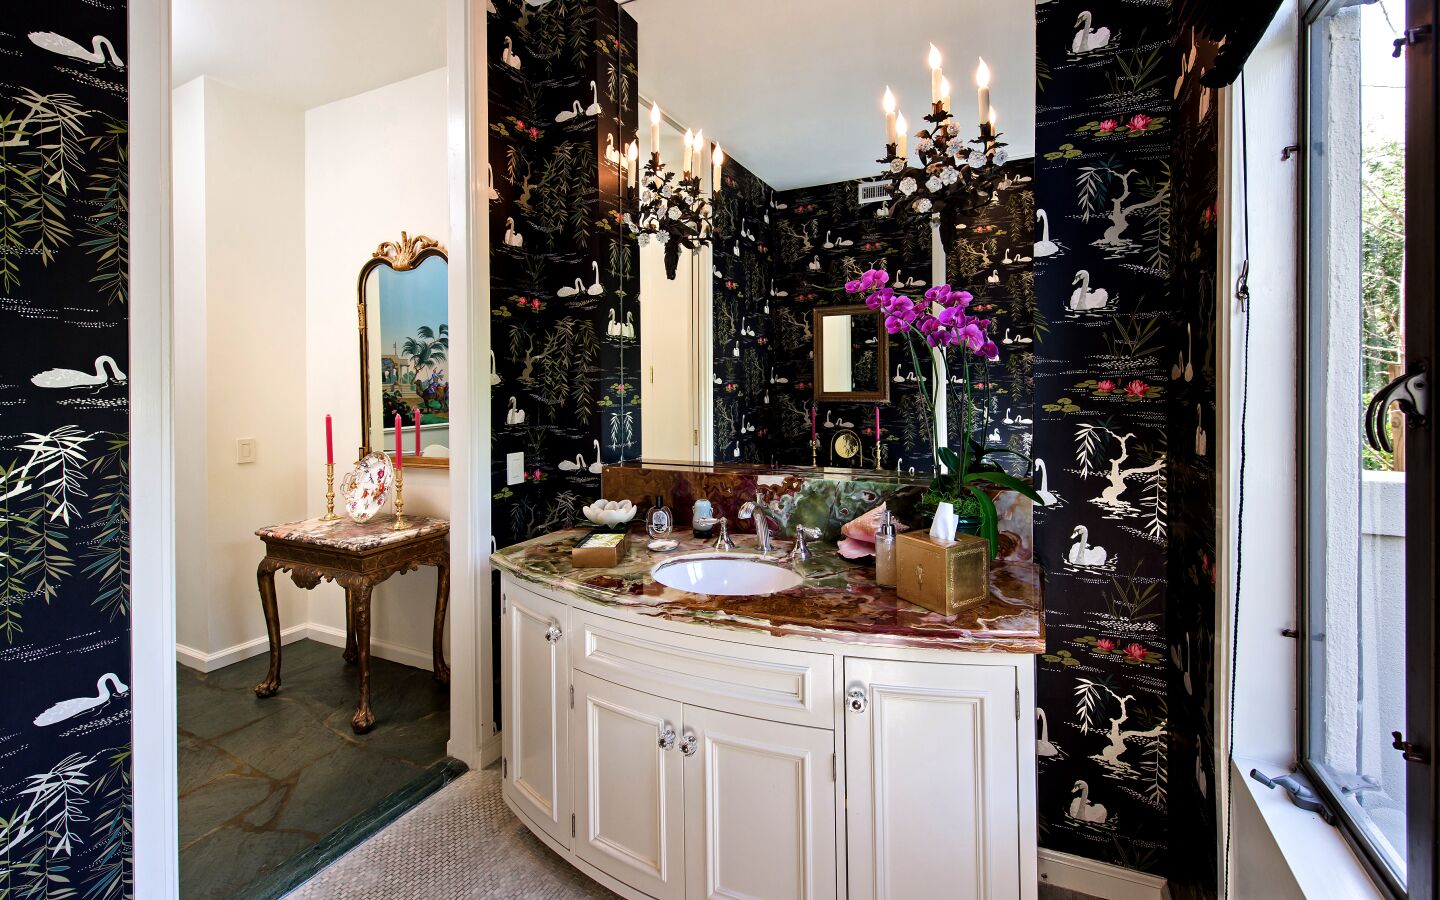 A bathroom inside the home with black wallpaper featuring a design with swans